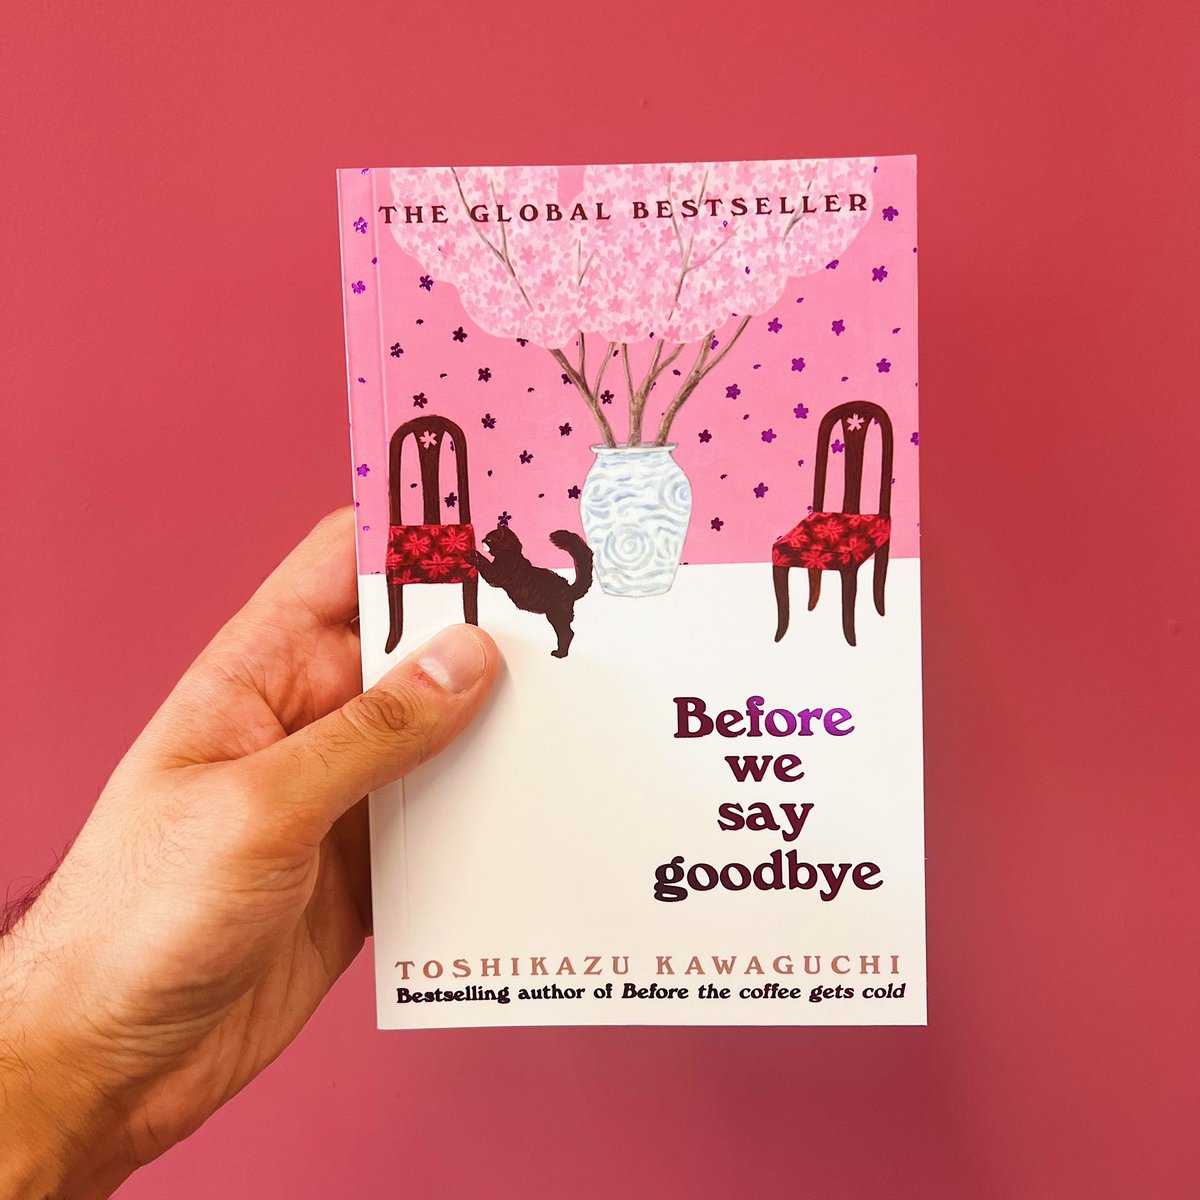 KAWAGUCHI FANS 🚨🐈🌸

I’ve got a very ~limited~ amount of proofs left for book 4 in the #BeforeTheCoffeeGetsCold series 👀 out in HB 14.09 from @picadorbooks, get in touch if you want one! But be quick… these will go fast!